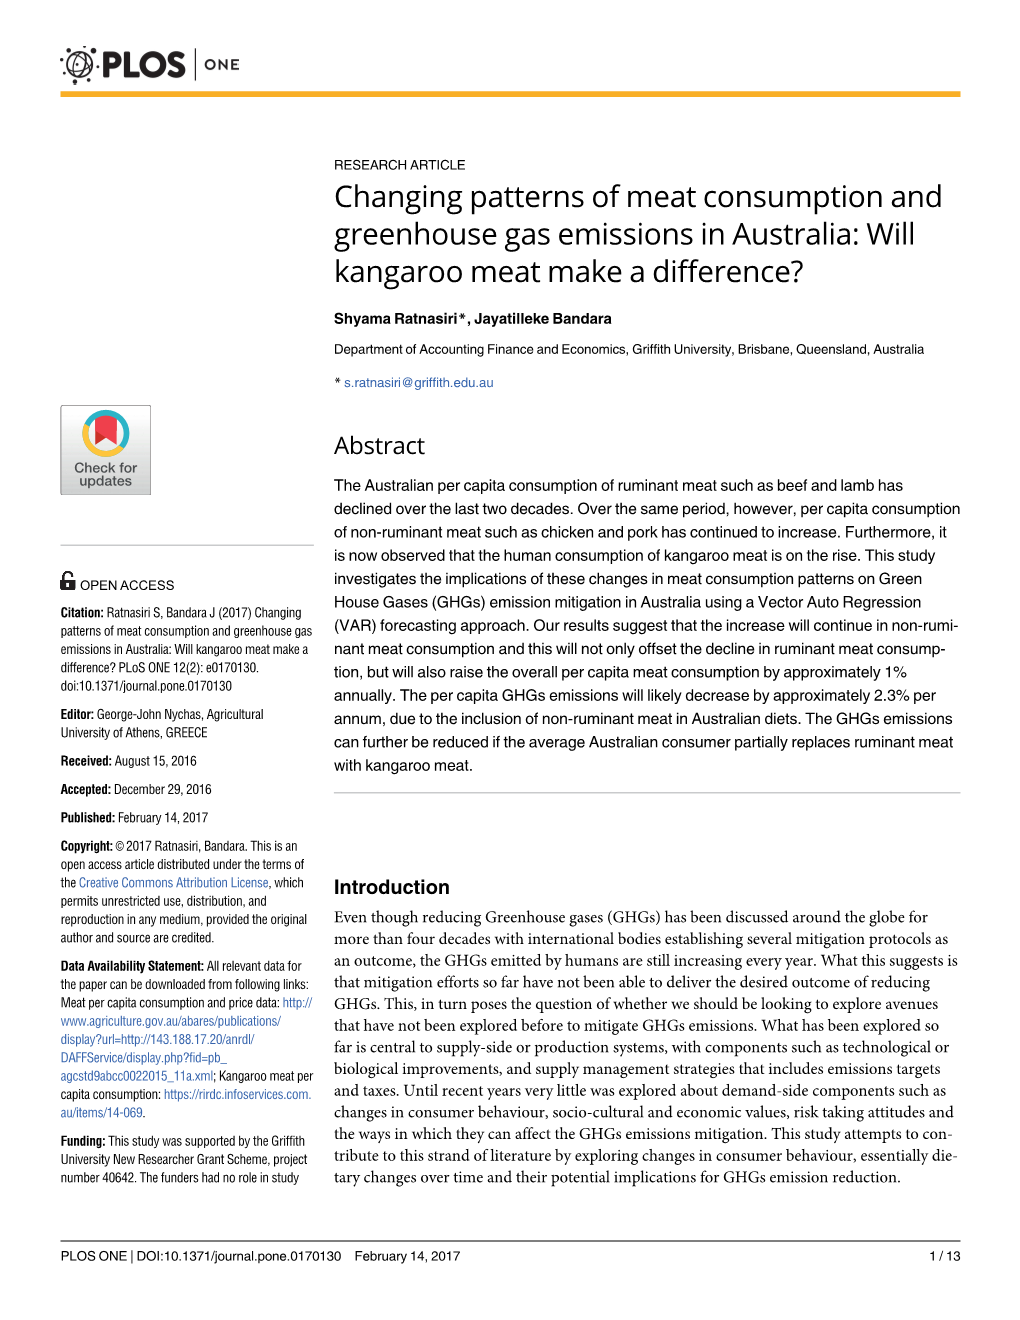 Changing Patterns of Meat Consumption and Greenhouse Gas Emissions in Australia: Will Kangaroo Meat Make a Difference?